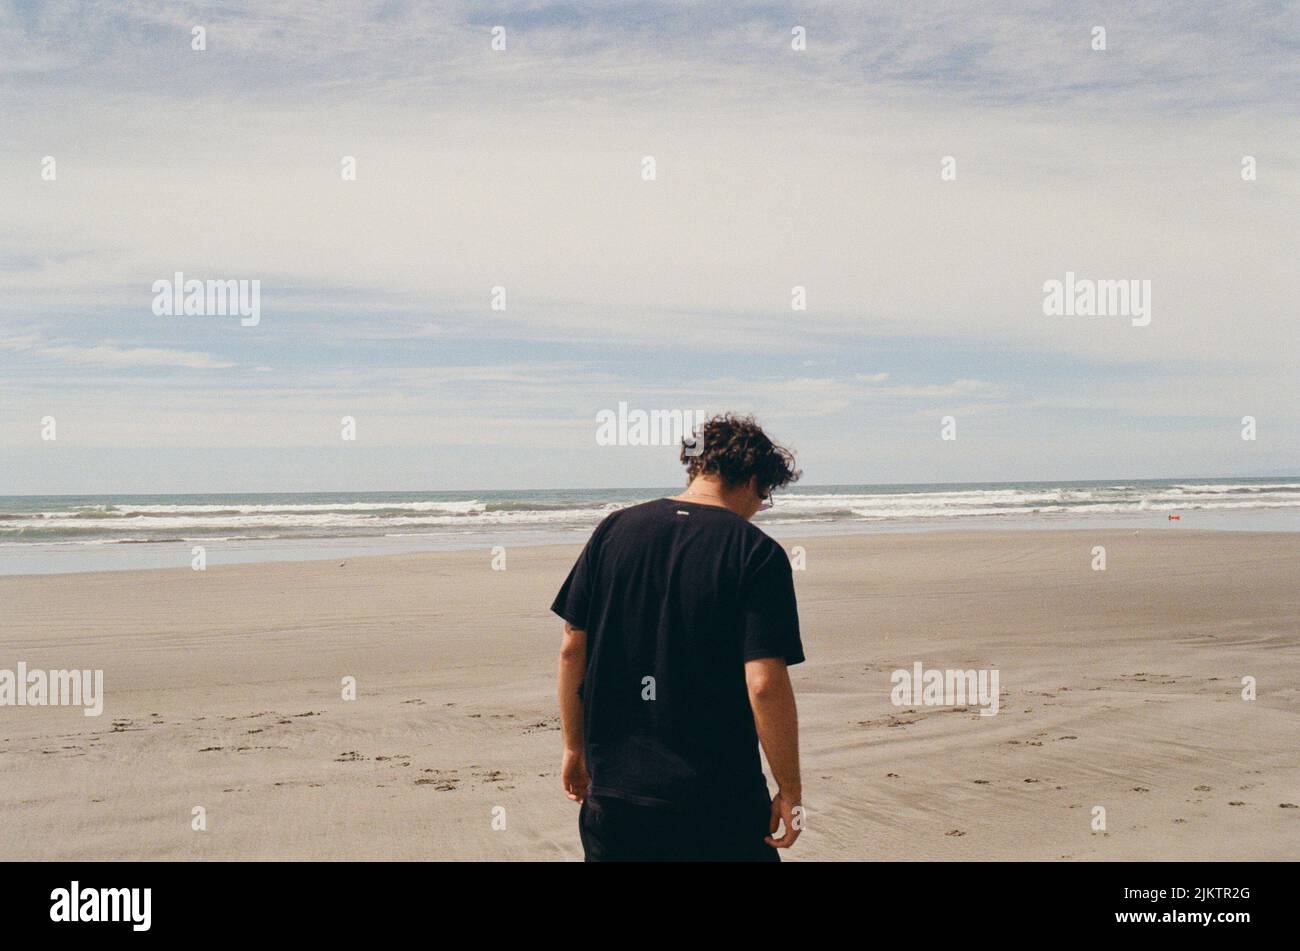 A back view of male with black t-shirt standing on sandy beach in background of sea Stock Photo